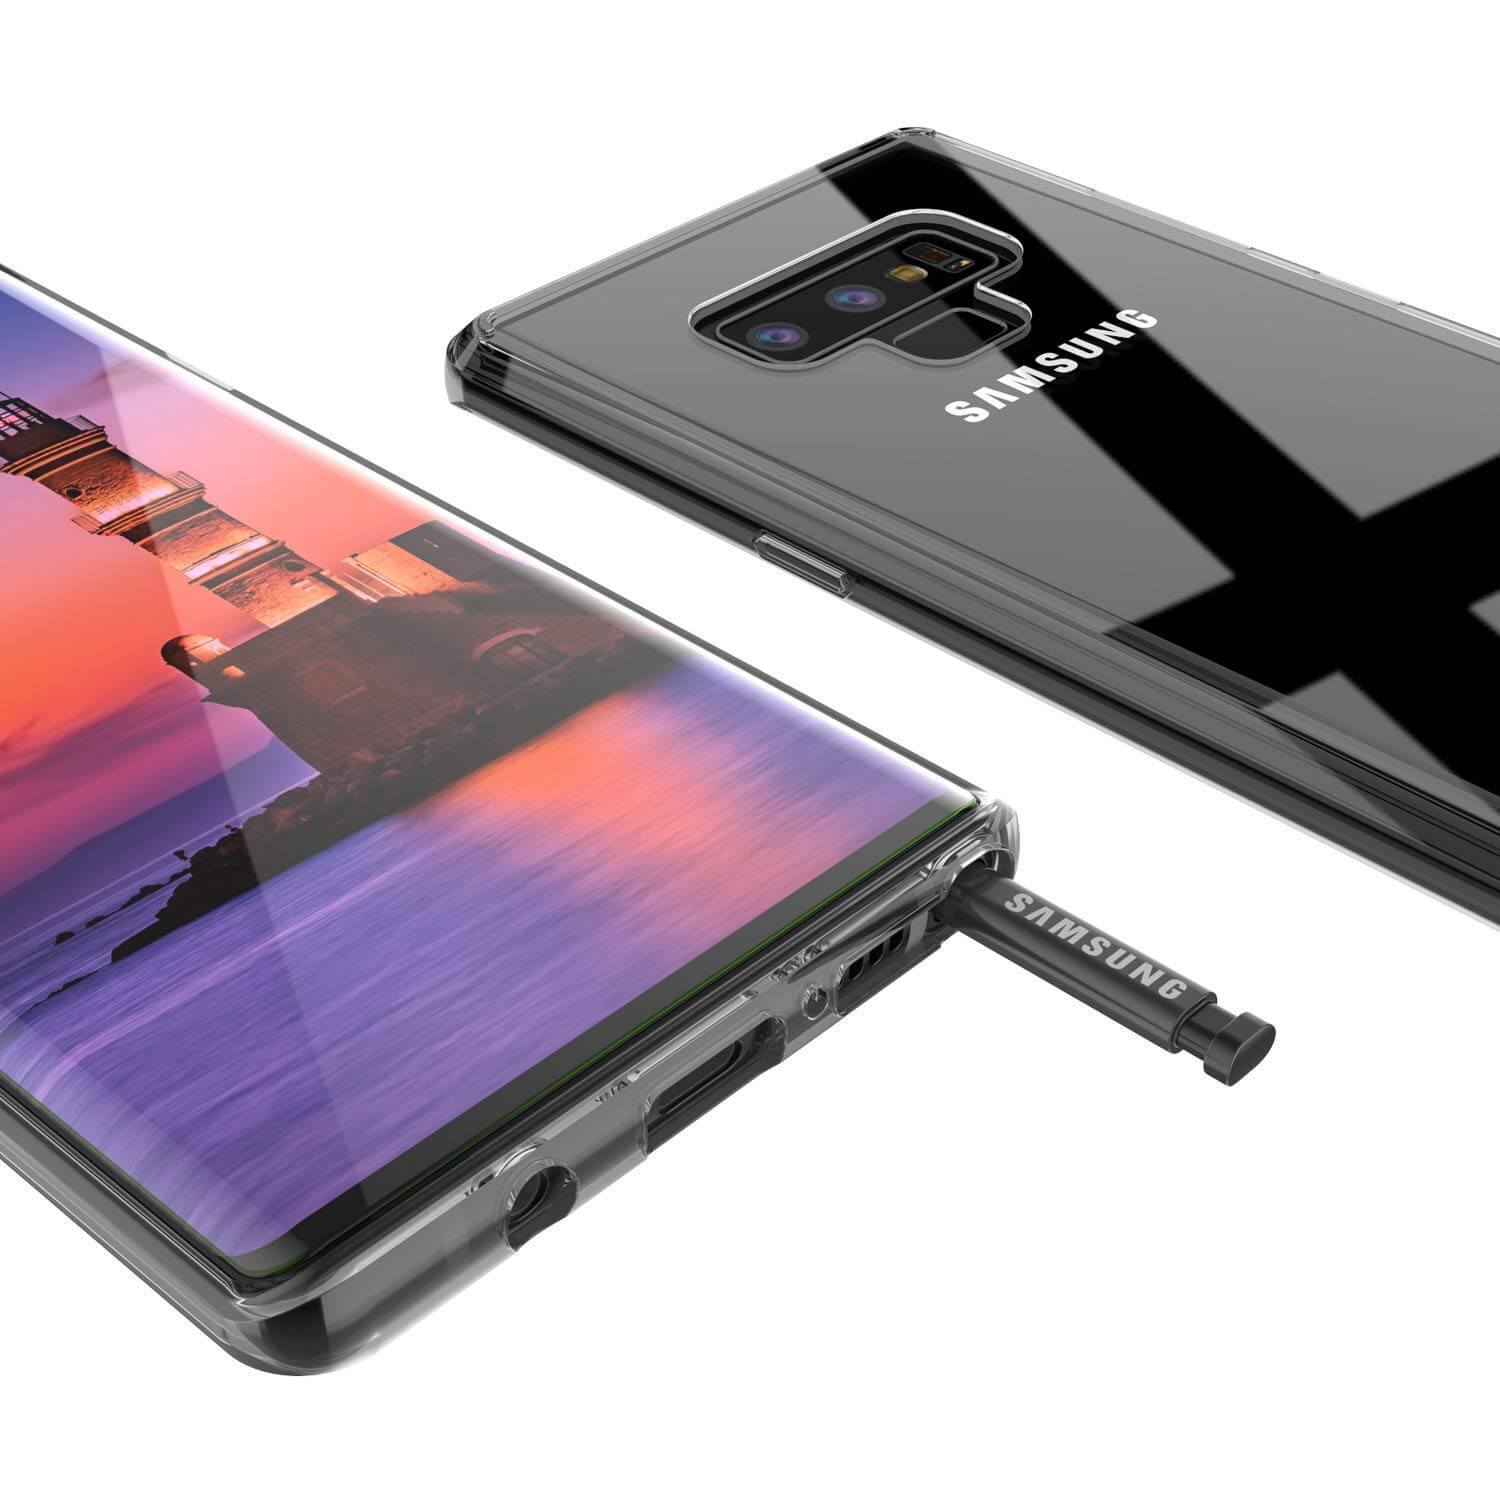 Galaxy Note 9 Case, PUNKcase [LUCID 2.0 Series] [Slim Fit] Armor Cover W/Integrated Anti-Shock System [Crystal Black] - PunkCase NZ